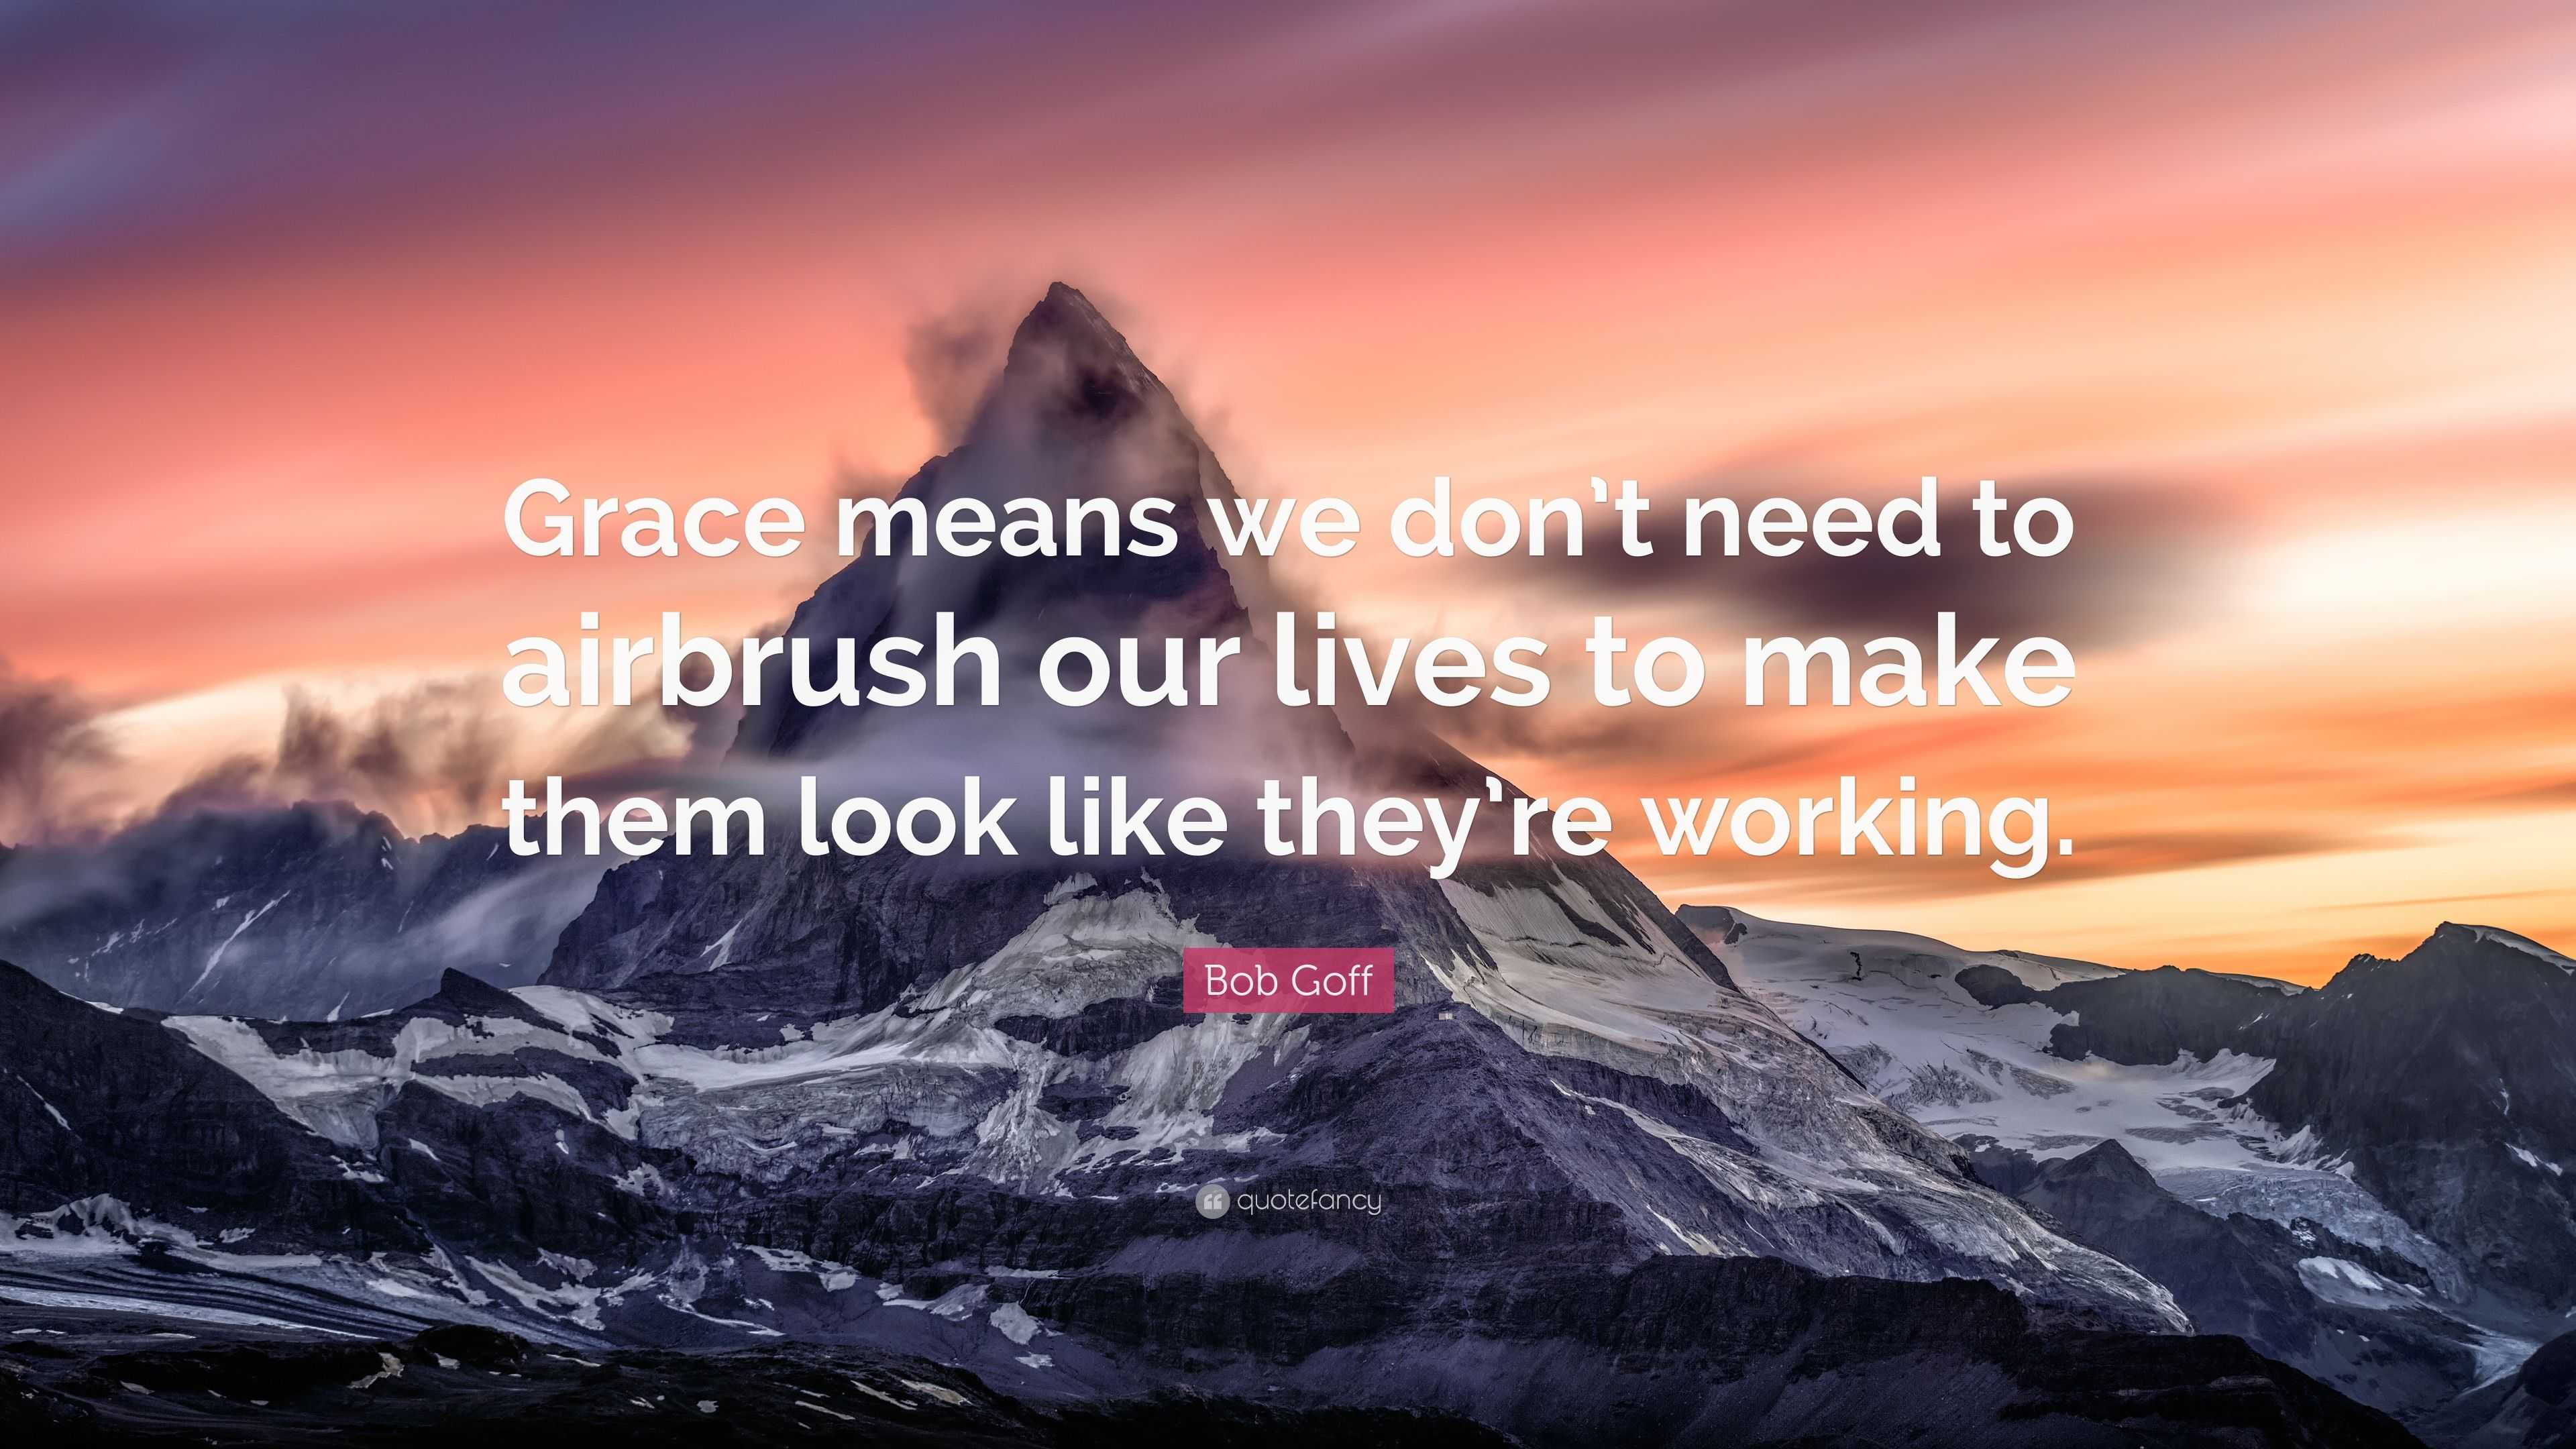 Bob Goff Quote: “Grace means we don't need to airbrush our lives